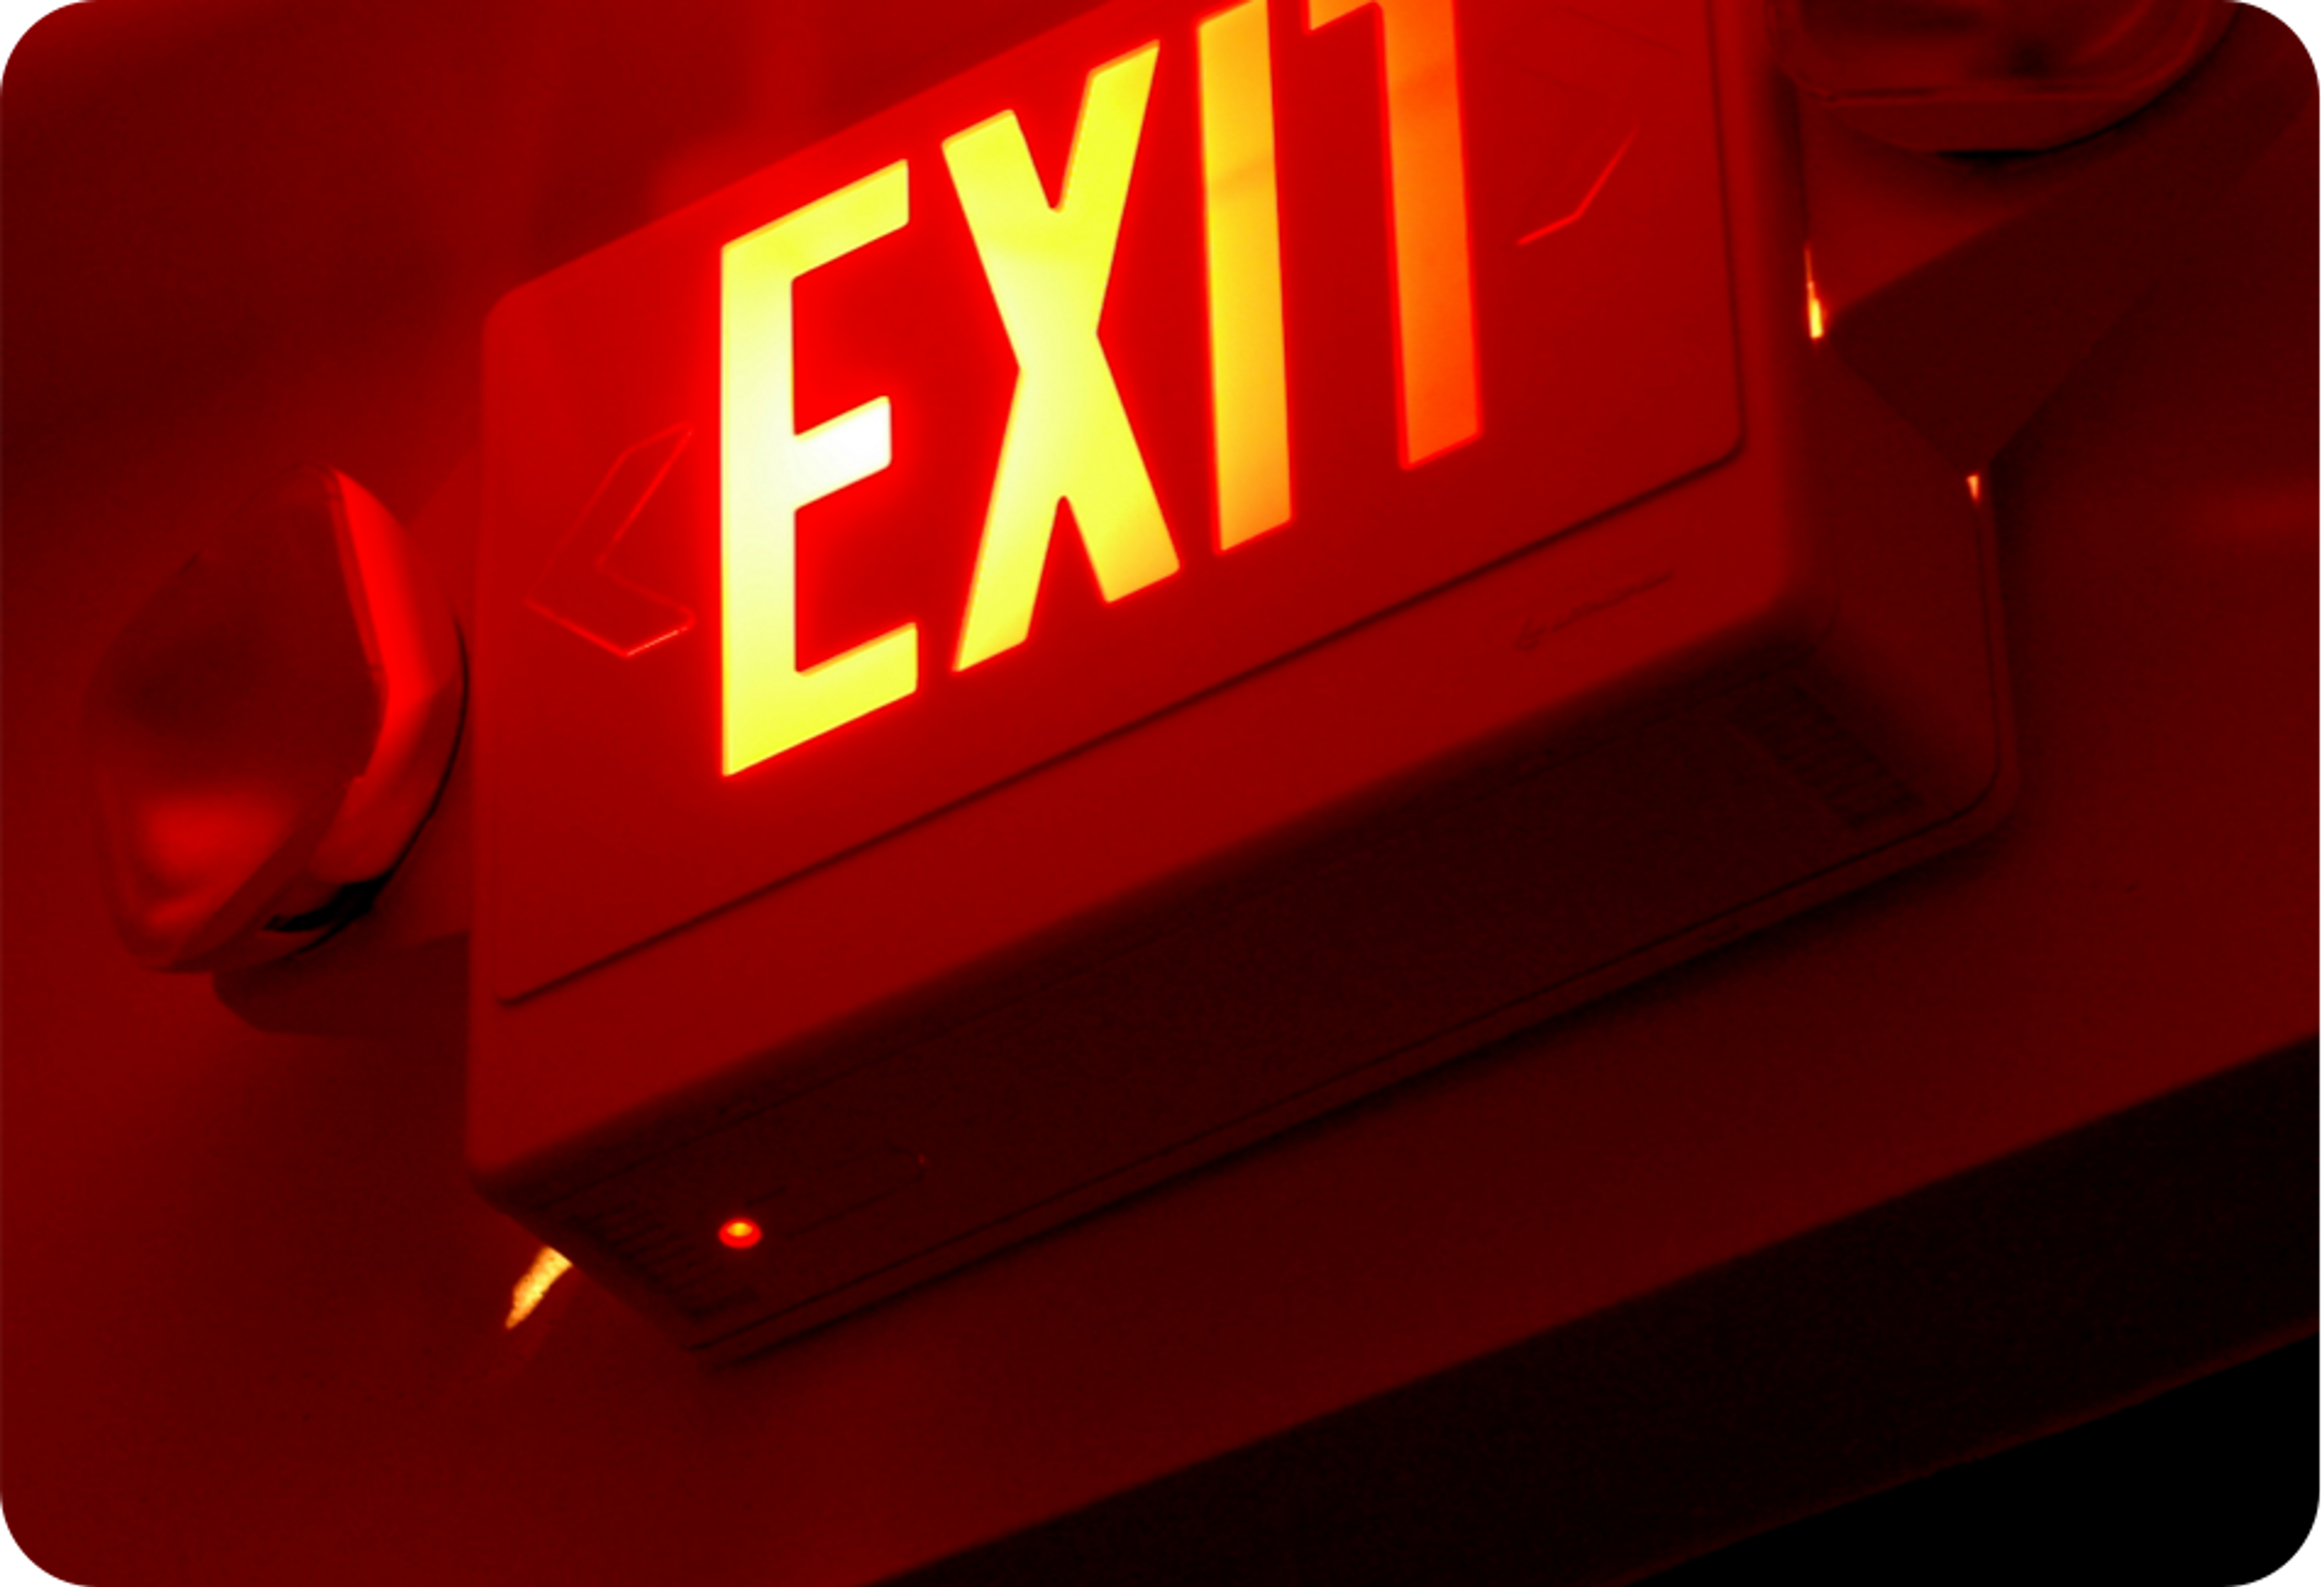 Picture of "EXIT" sign glowing red 